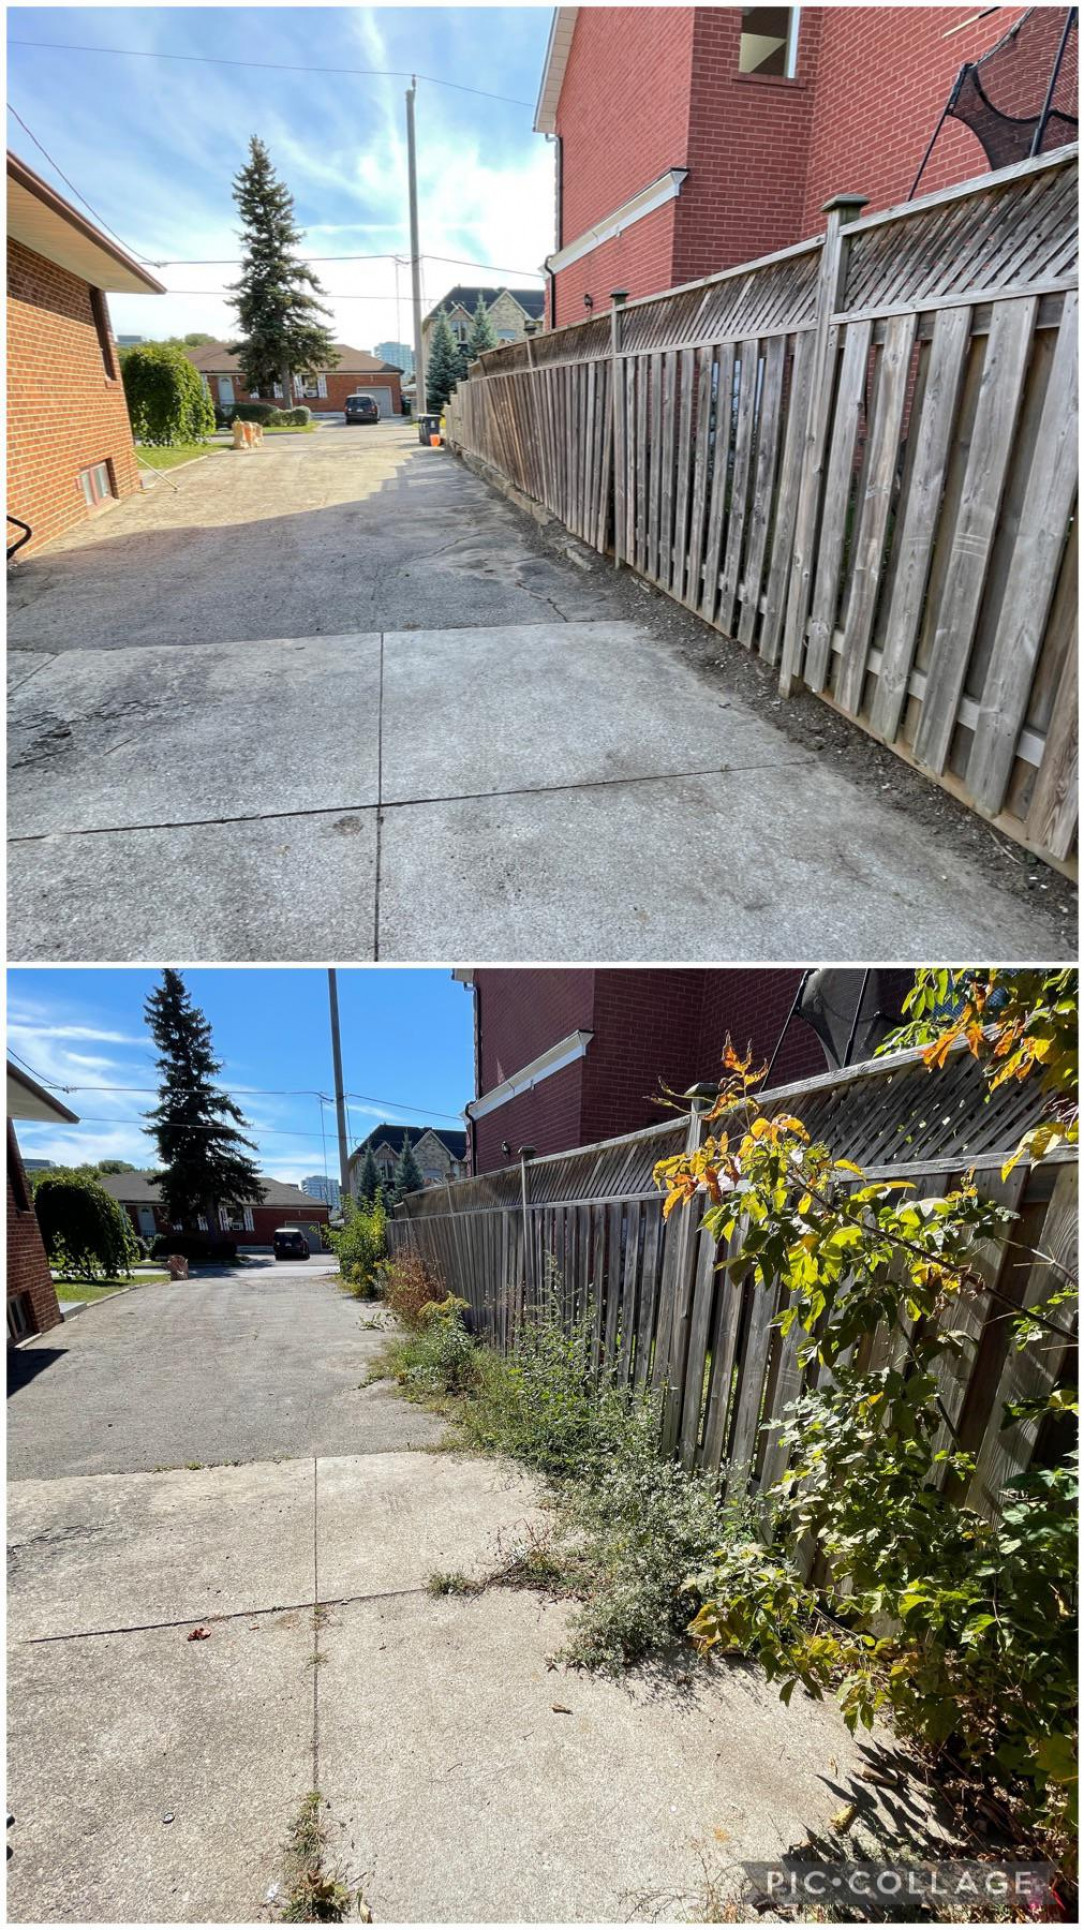 Cleaned this property up today - before/after from the driveway